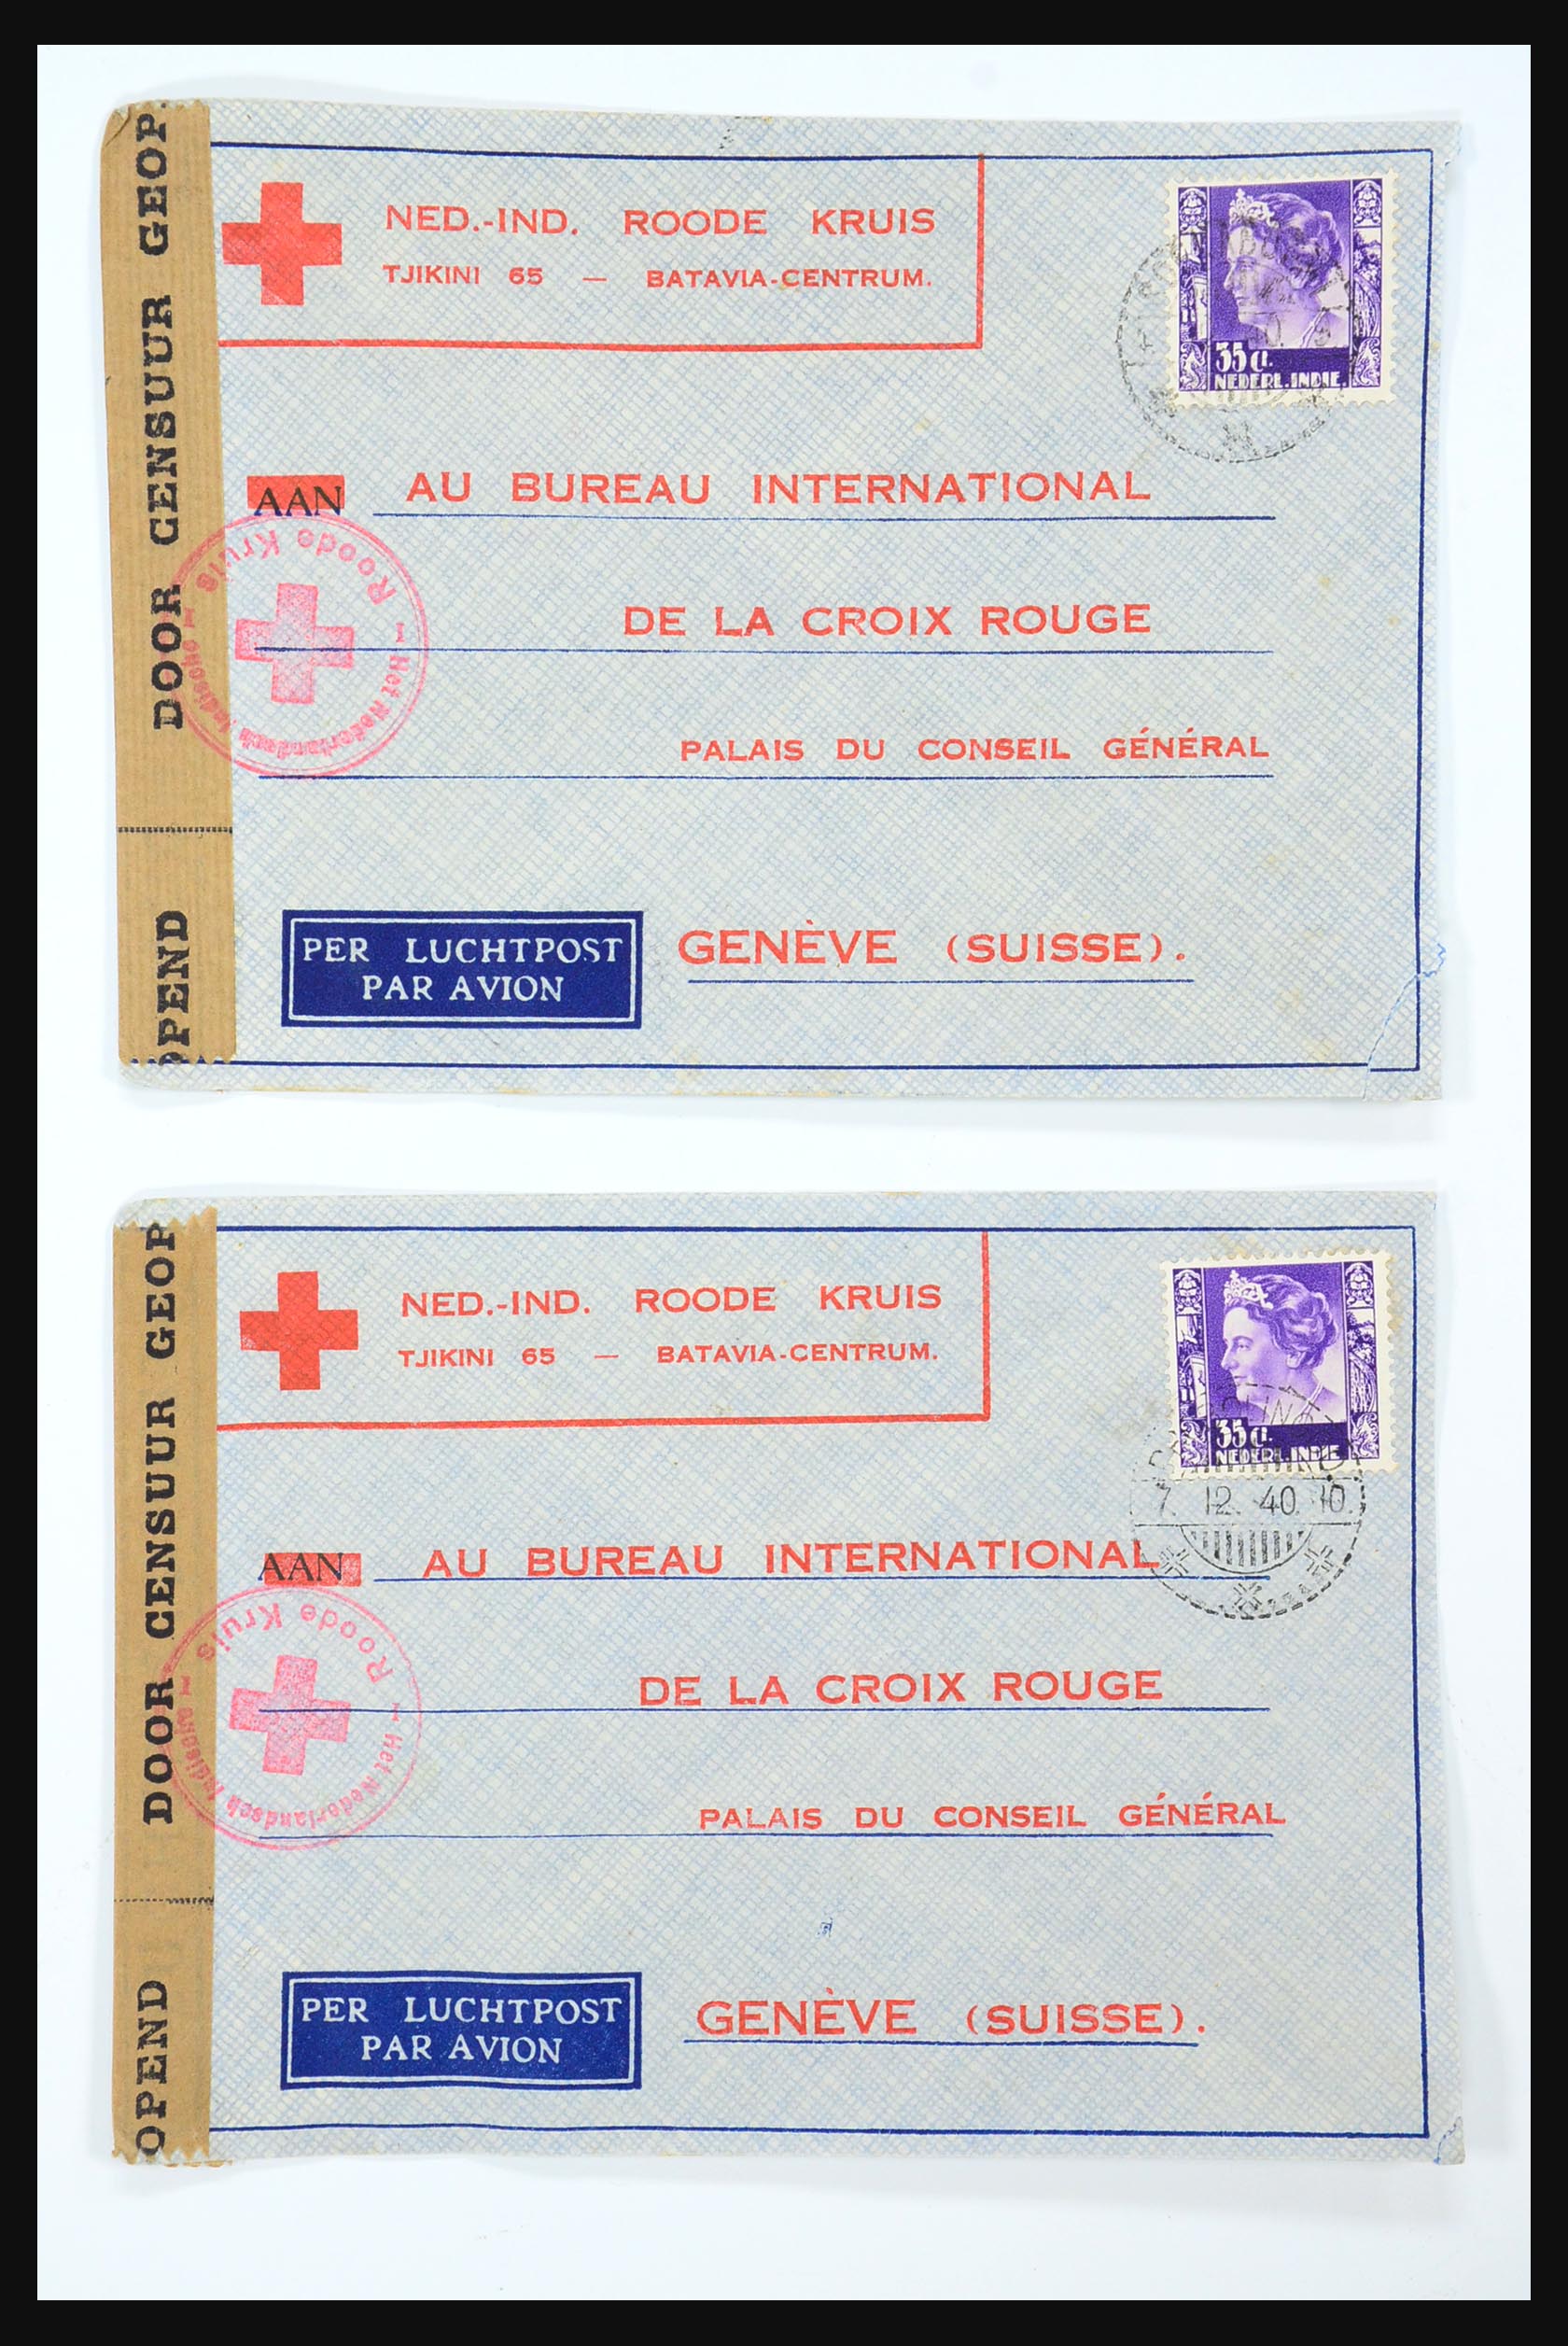 31362 091 - 31362 Netherlands Indies Japanese occupation covers 1942-1945.